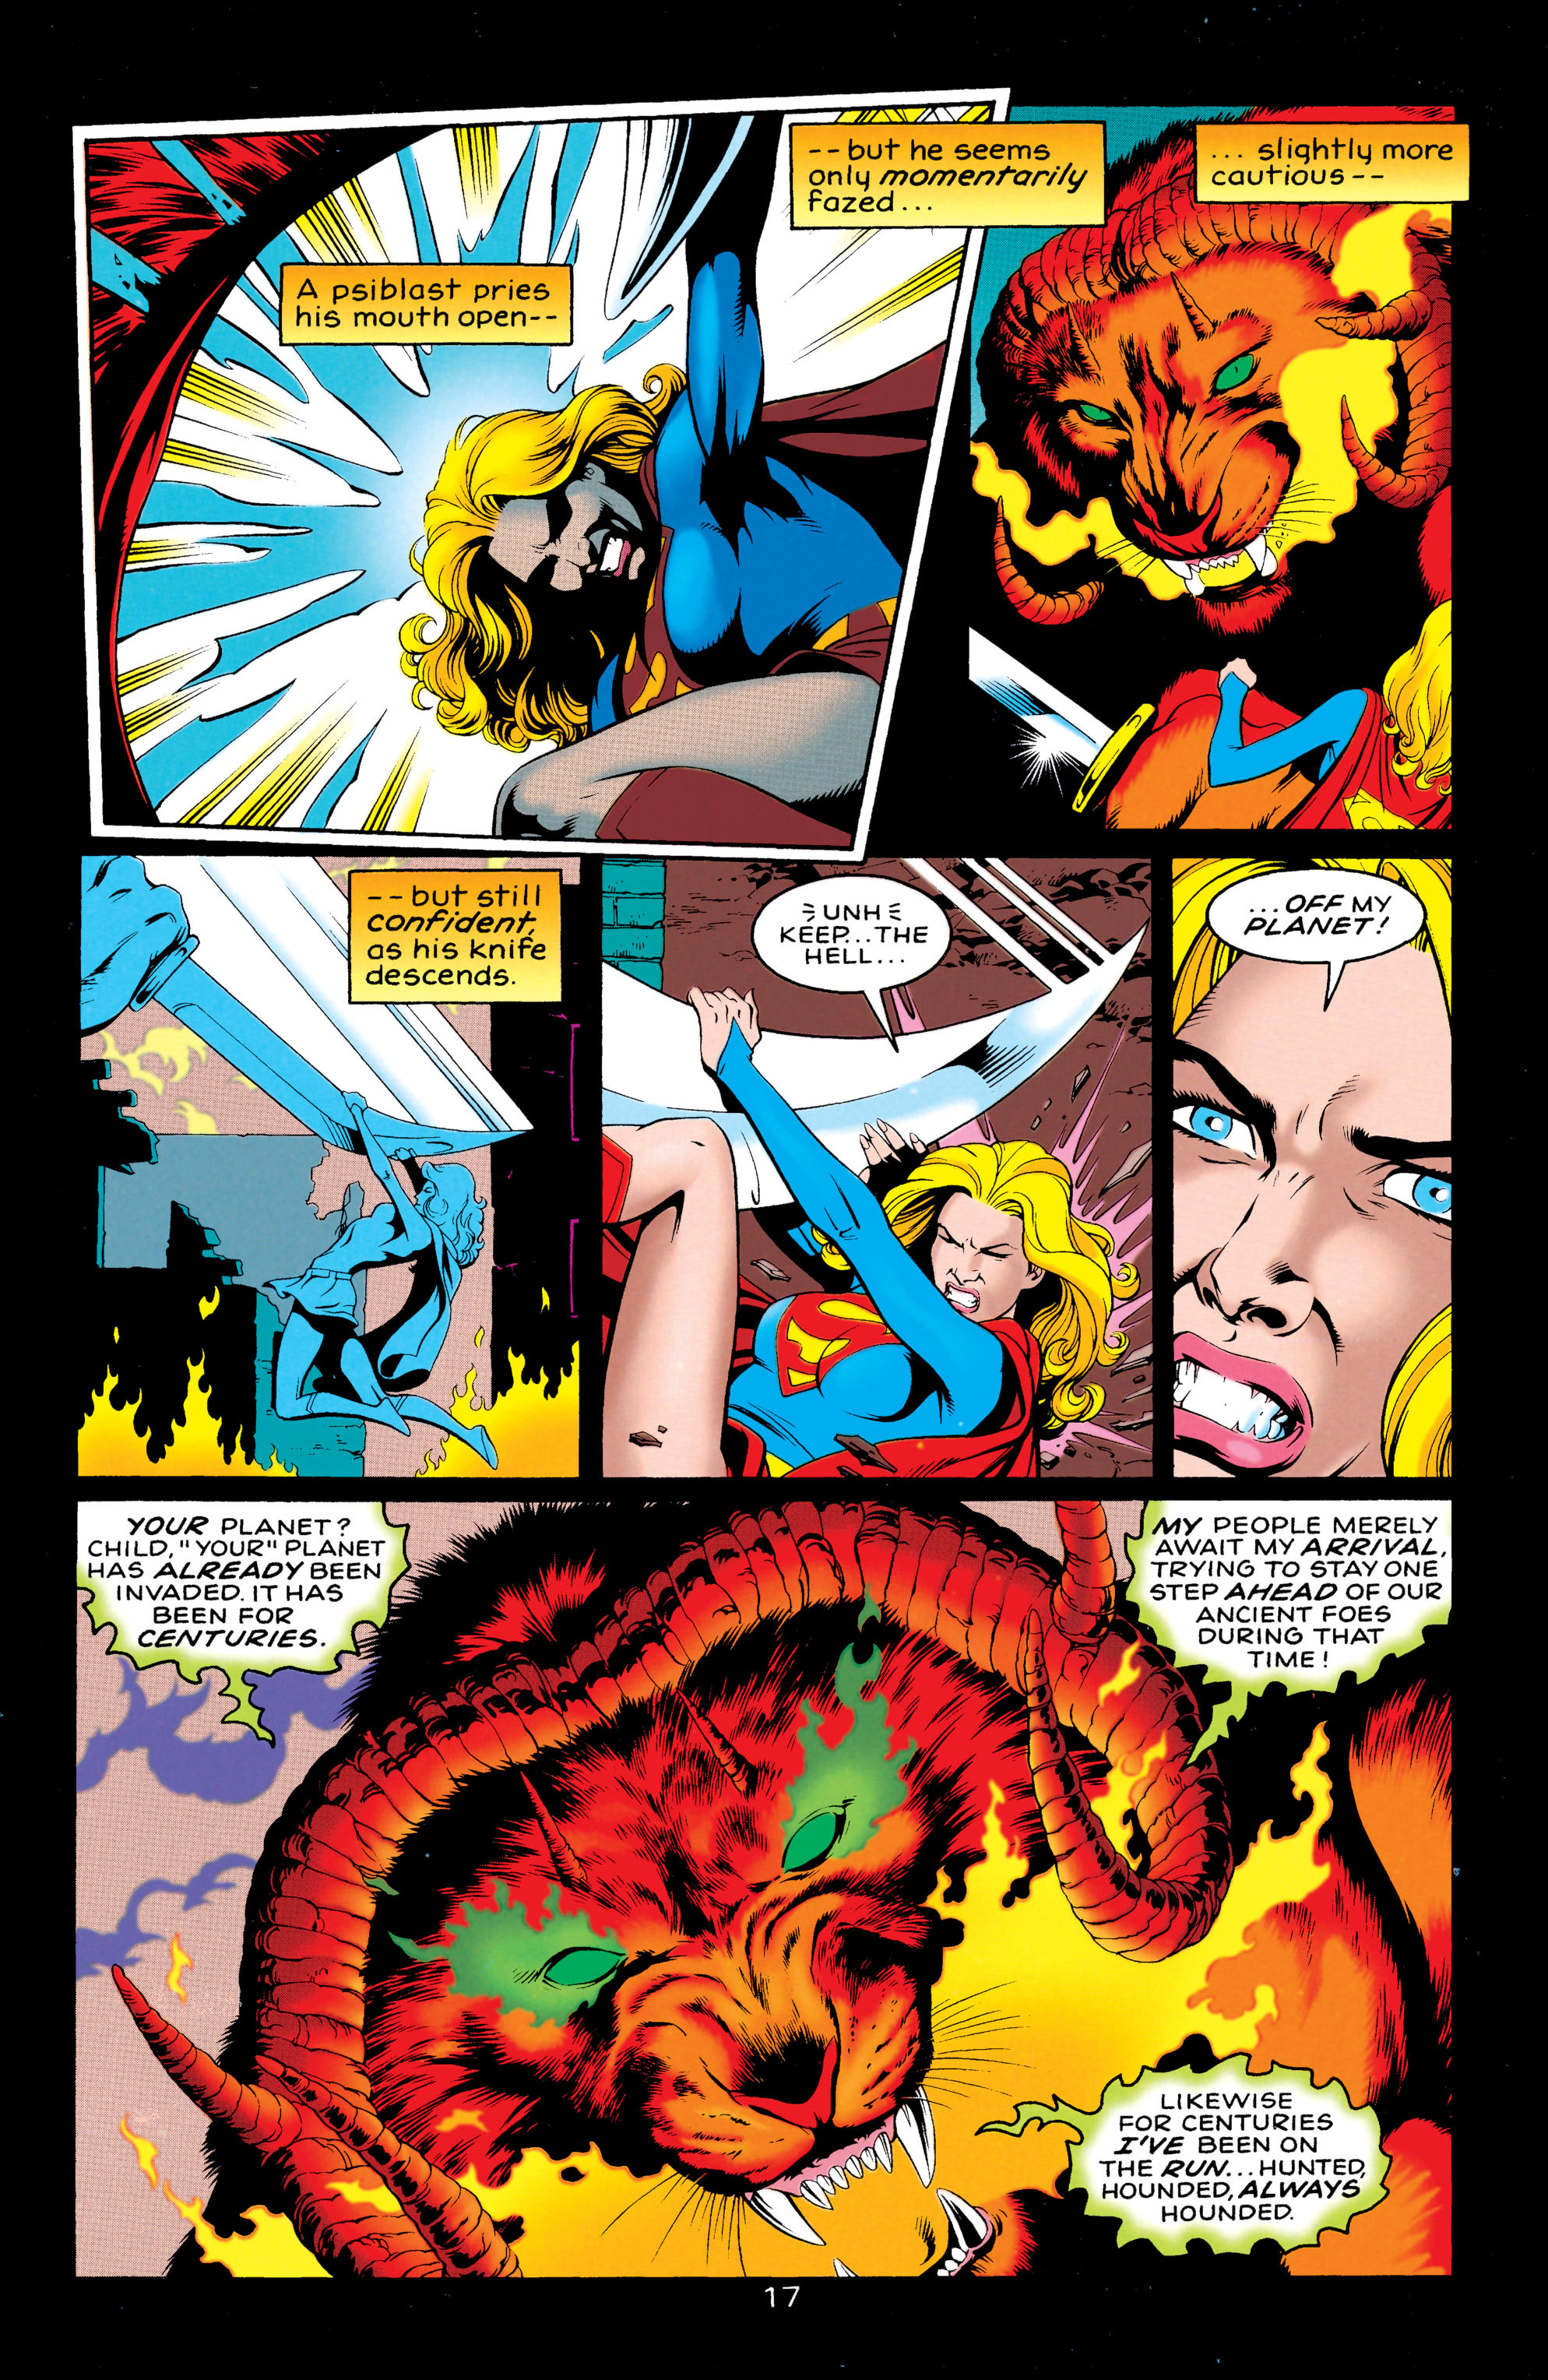 Supergirl (1996) 2 Page 17